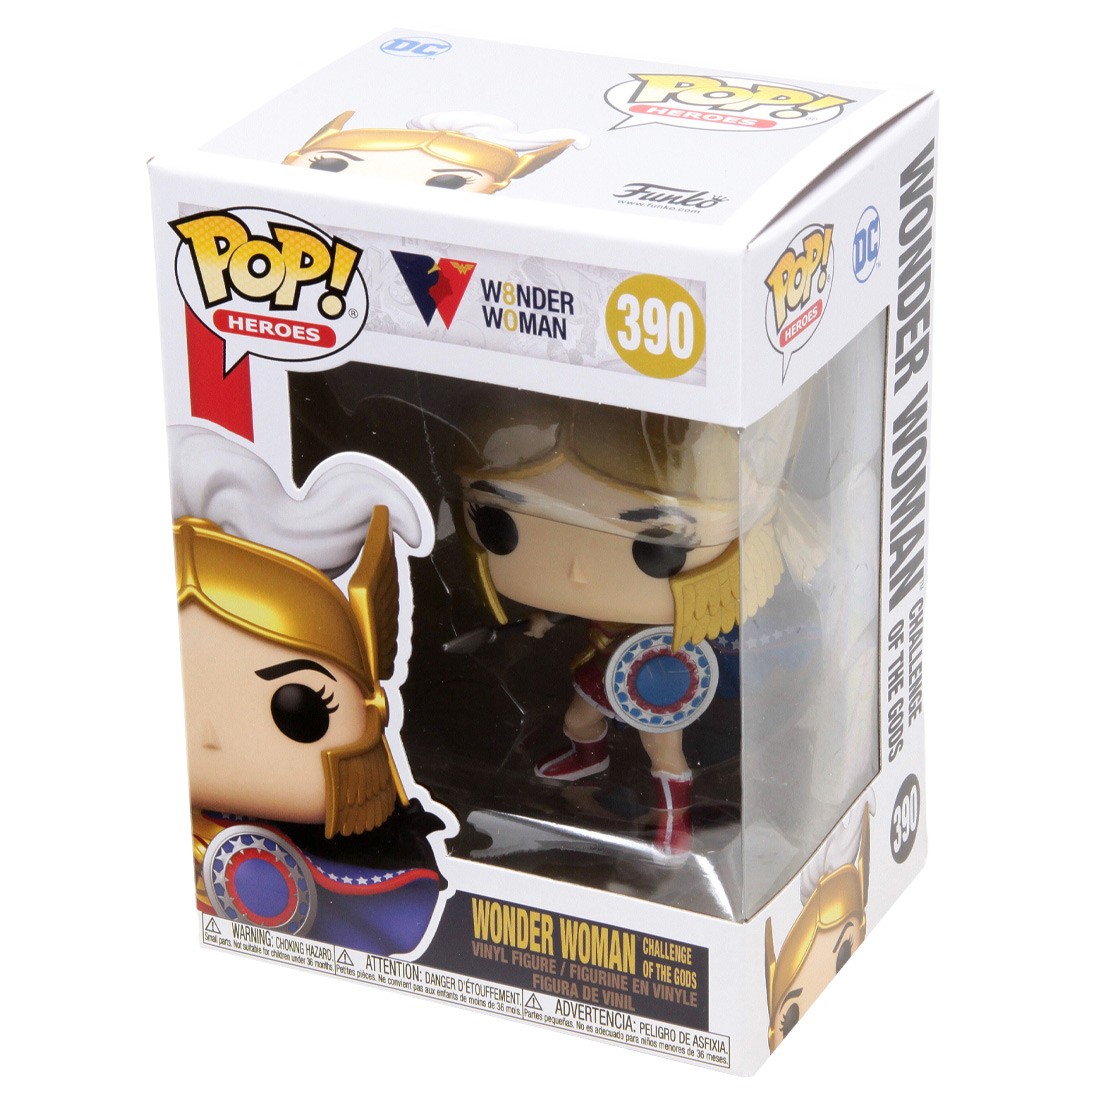 Funko Pop Multicolor Challenge of The Gods 3.75 inches Heroes: Wonder Woman 80th-Wonder Woman 